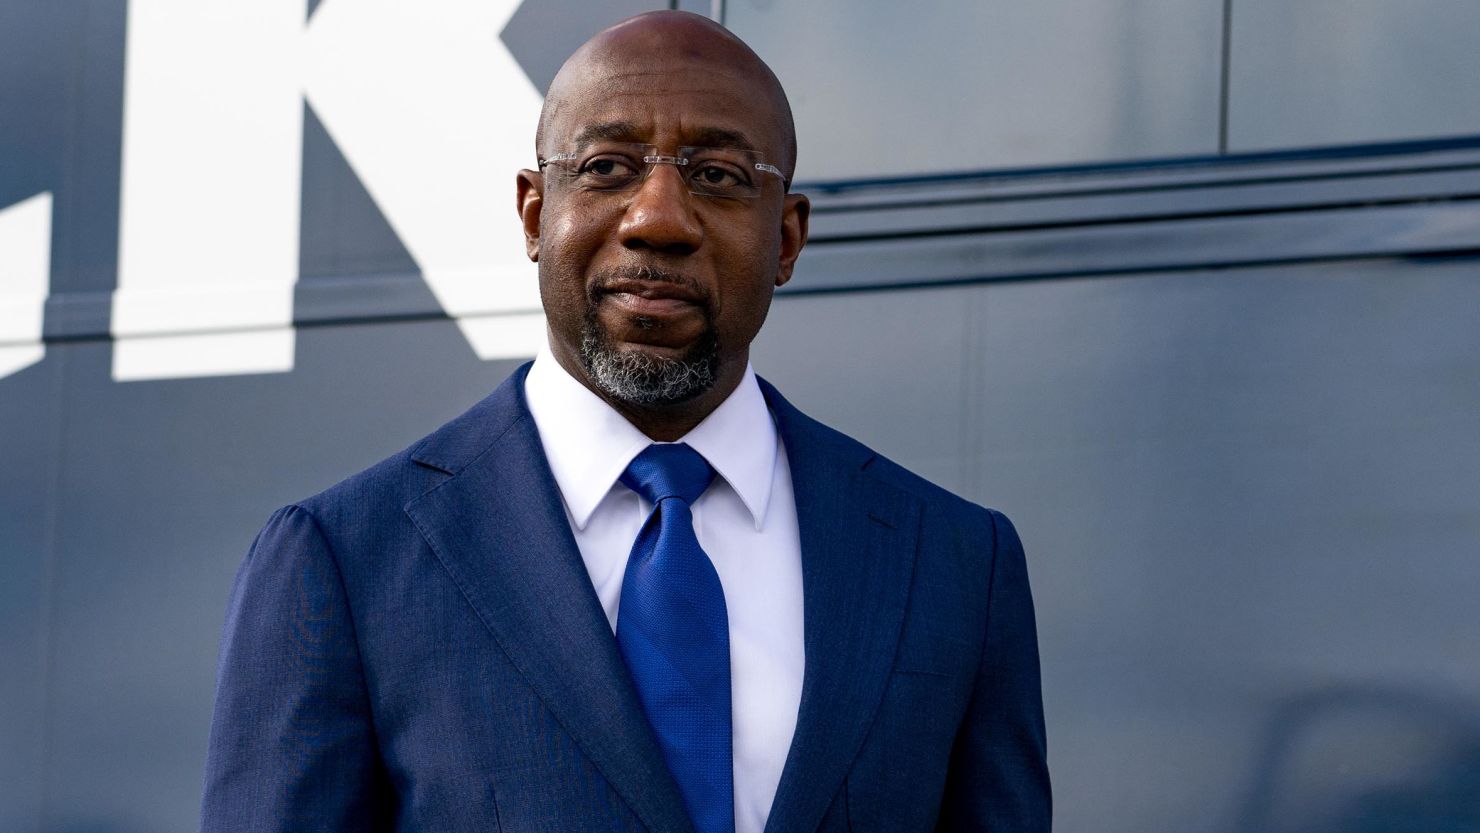 Then-Georgia Democratic Candidate Rev. Raphael Warnock meets with supporters on January 5, 2021 in Marietta, Georgia. Warnock won his seat but faces a reelection battle next year. 